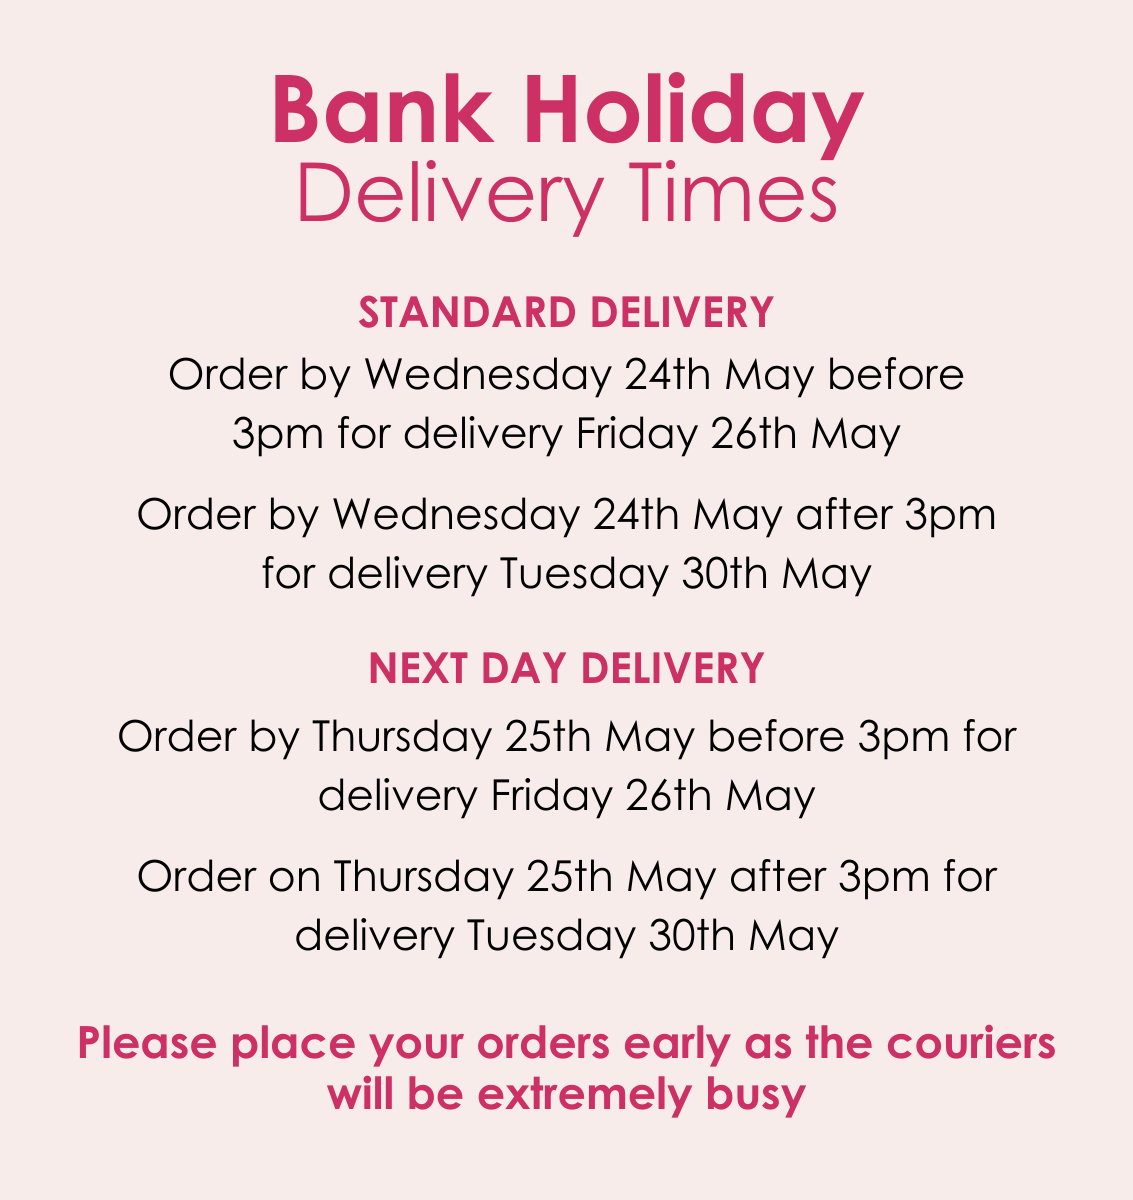 Bank Holiday delivery times